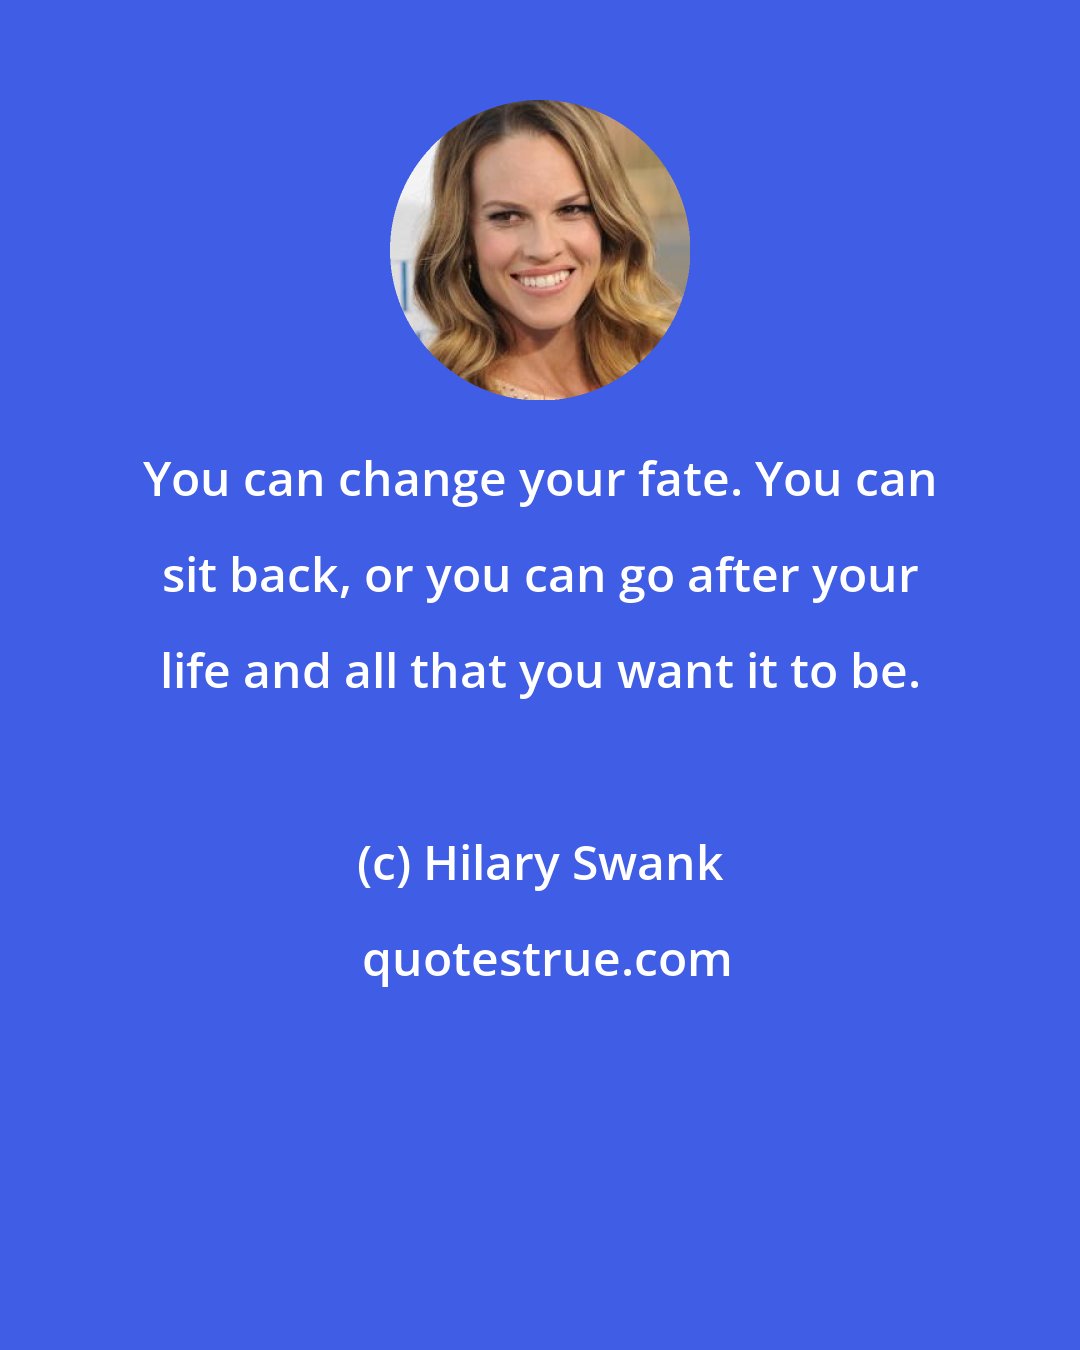 Hilary Swank: You can change your fate. You can sit back, or you can go after your life and all that you want it to be.